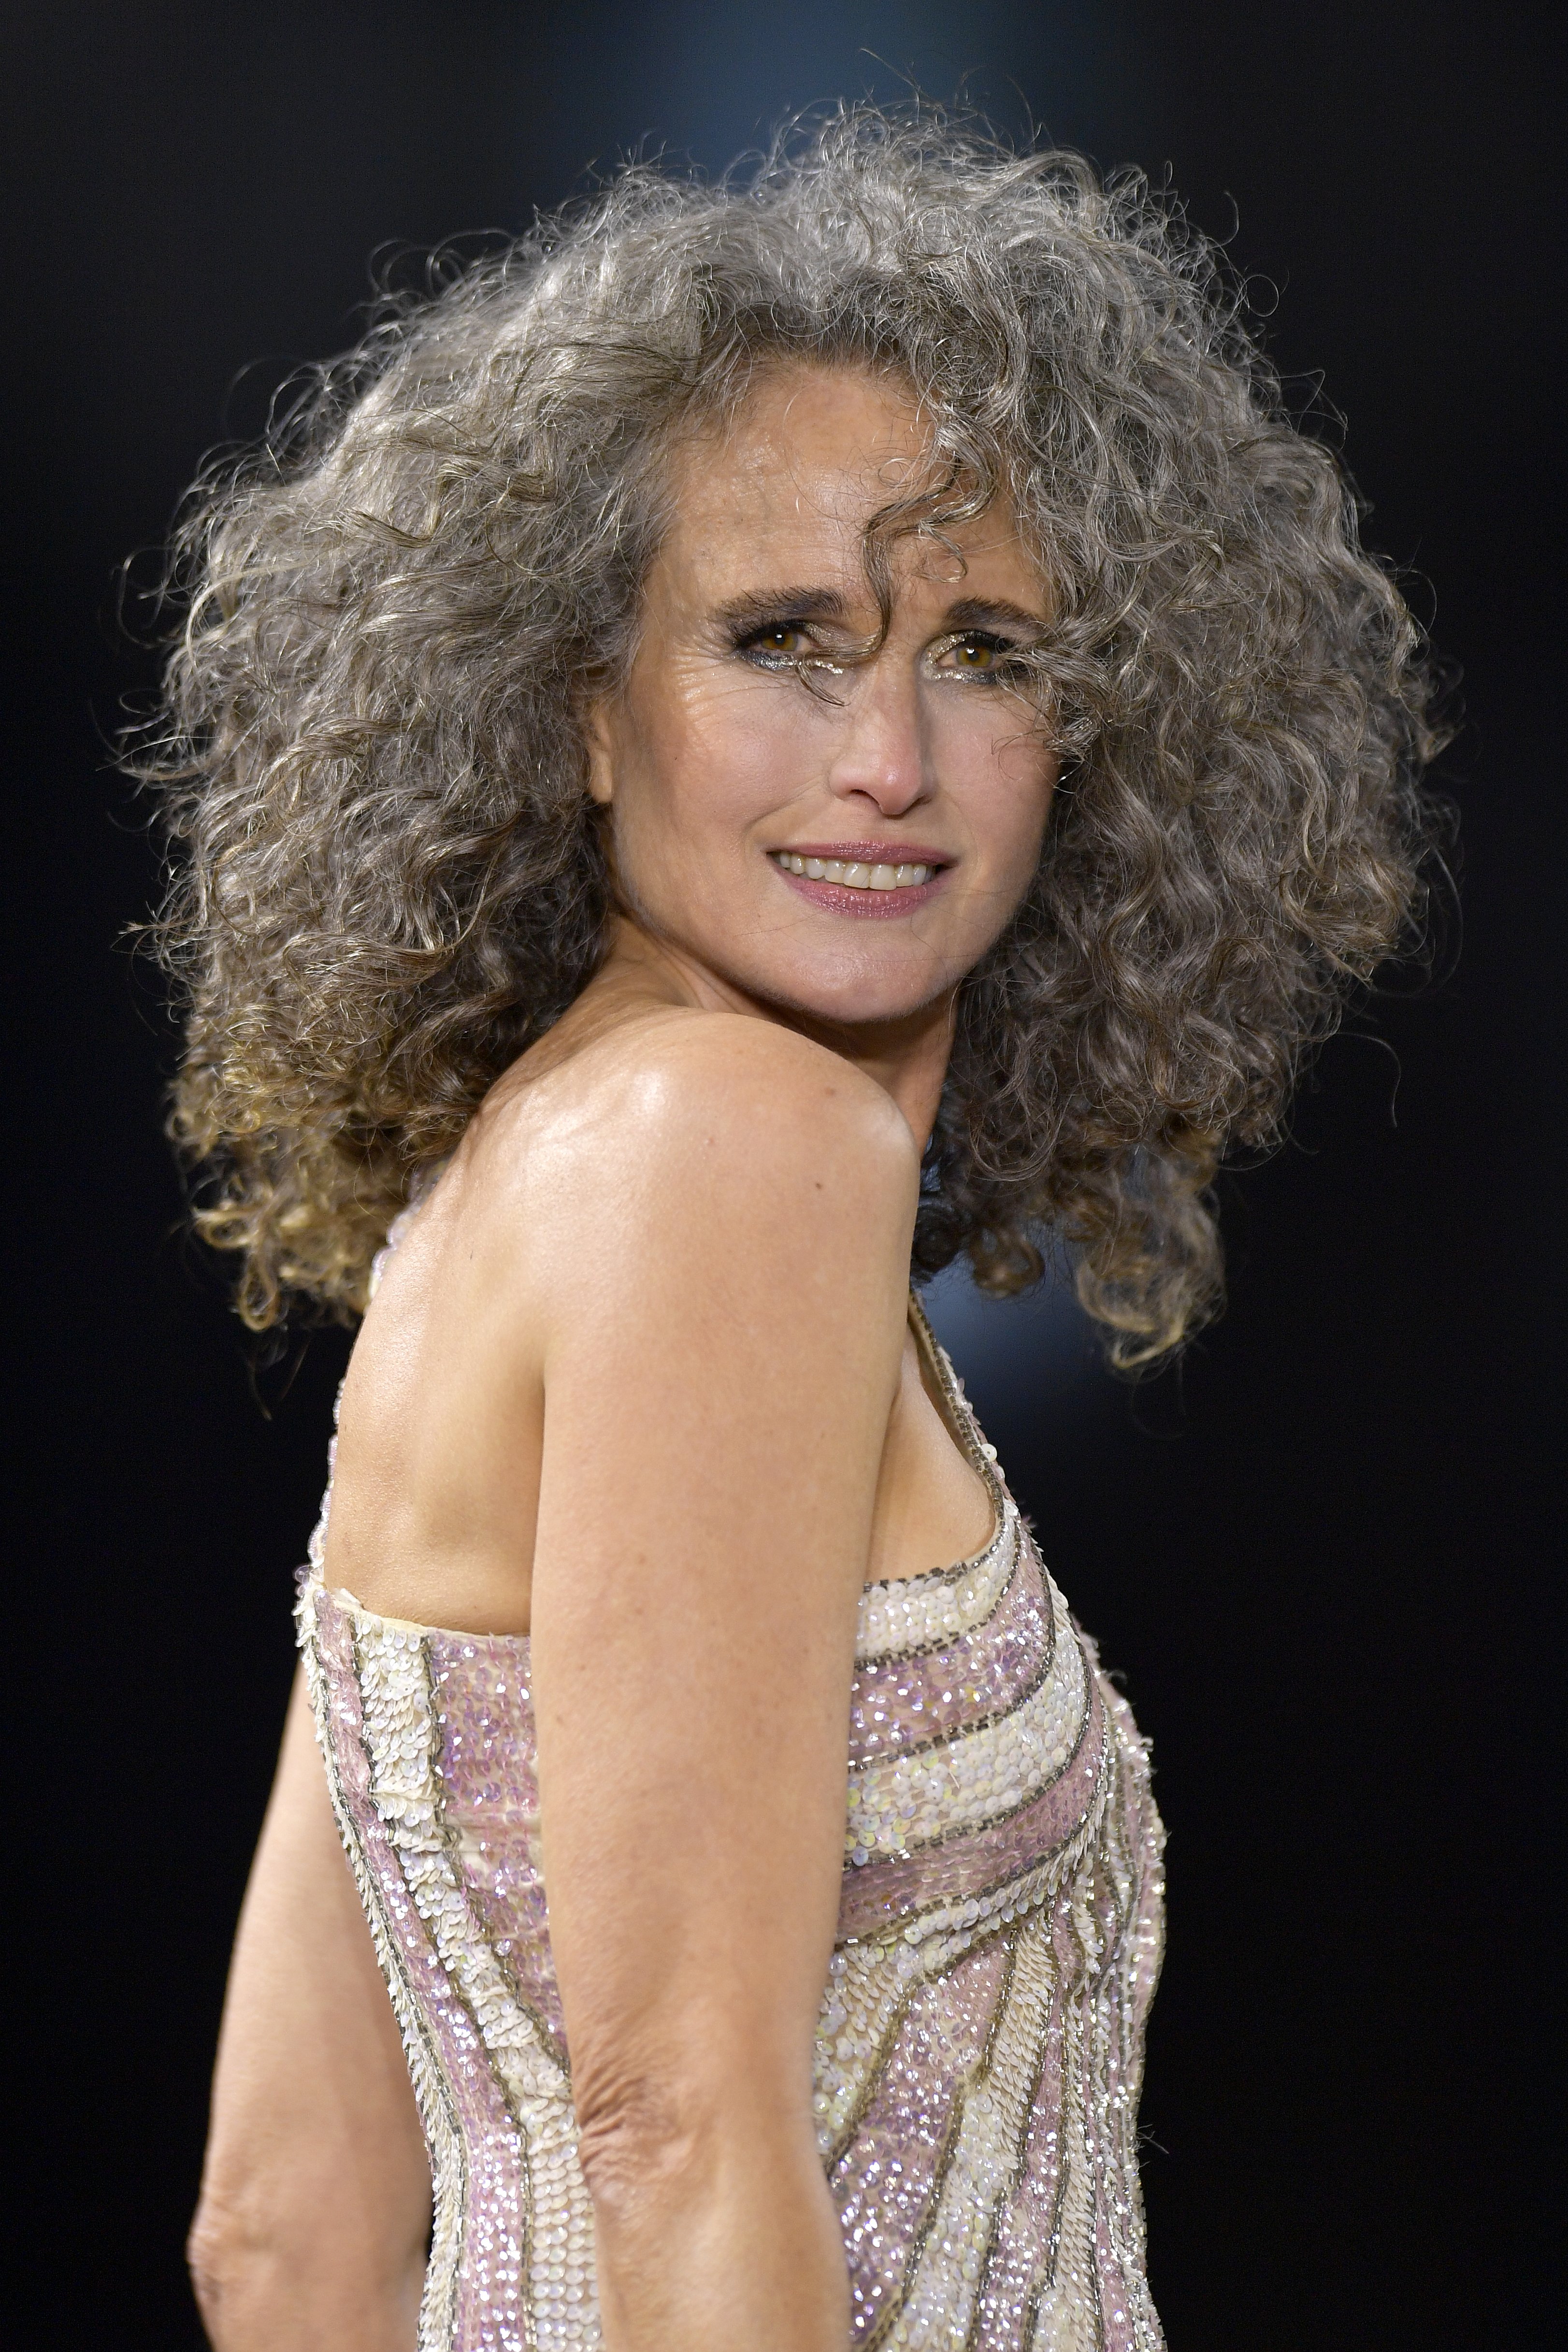 Andie MacDowell during the "Le Defile Walk Your Worth" By L'Oreal Paris Womenswear Spring/Summer 2023 show on October 2, 2022 in Paris, France ┃Source: Getty Images